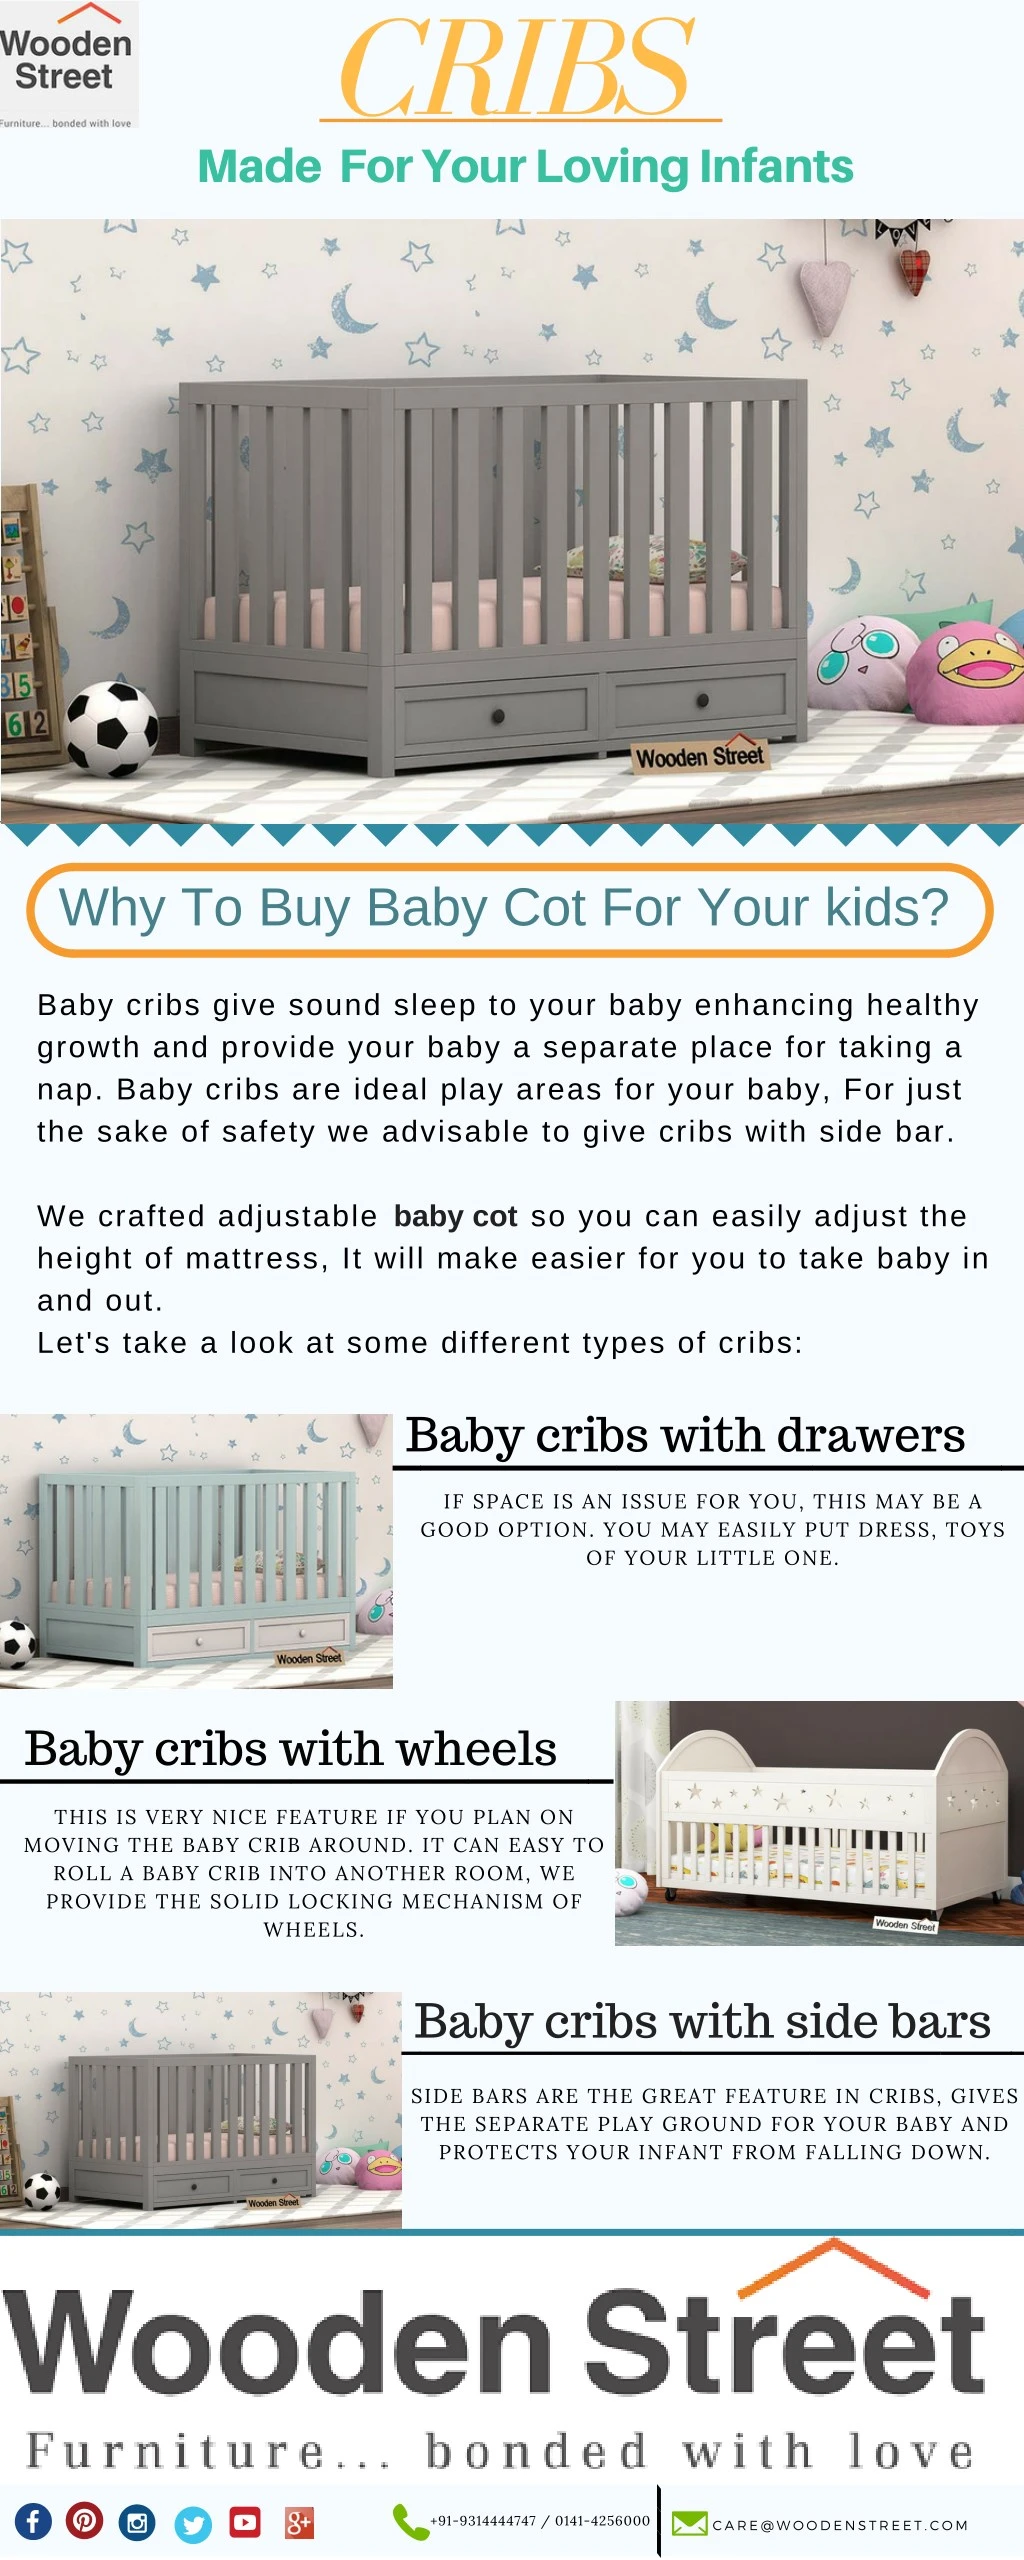 cribs made for your loving infants